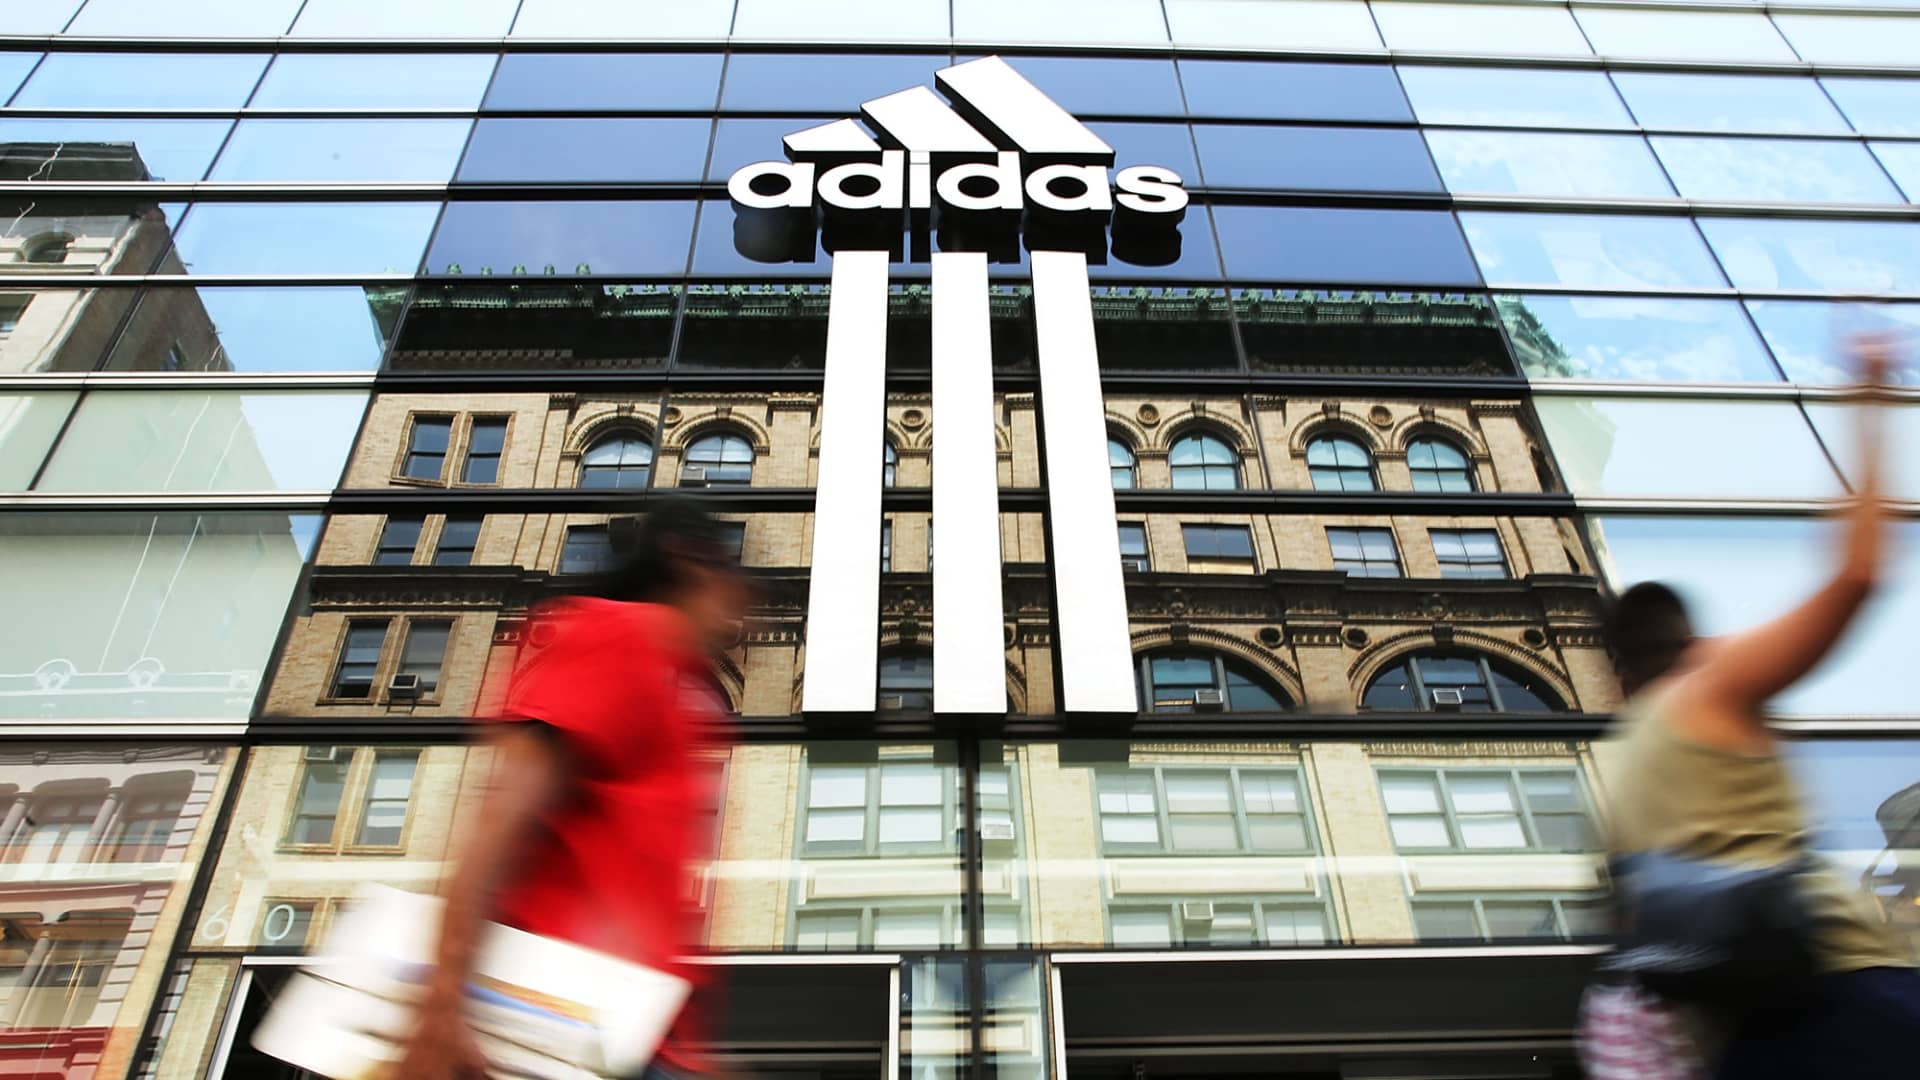 Adidas announces new network that will allow more than 50,000 student-athletes to be paid ambassadors